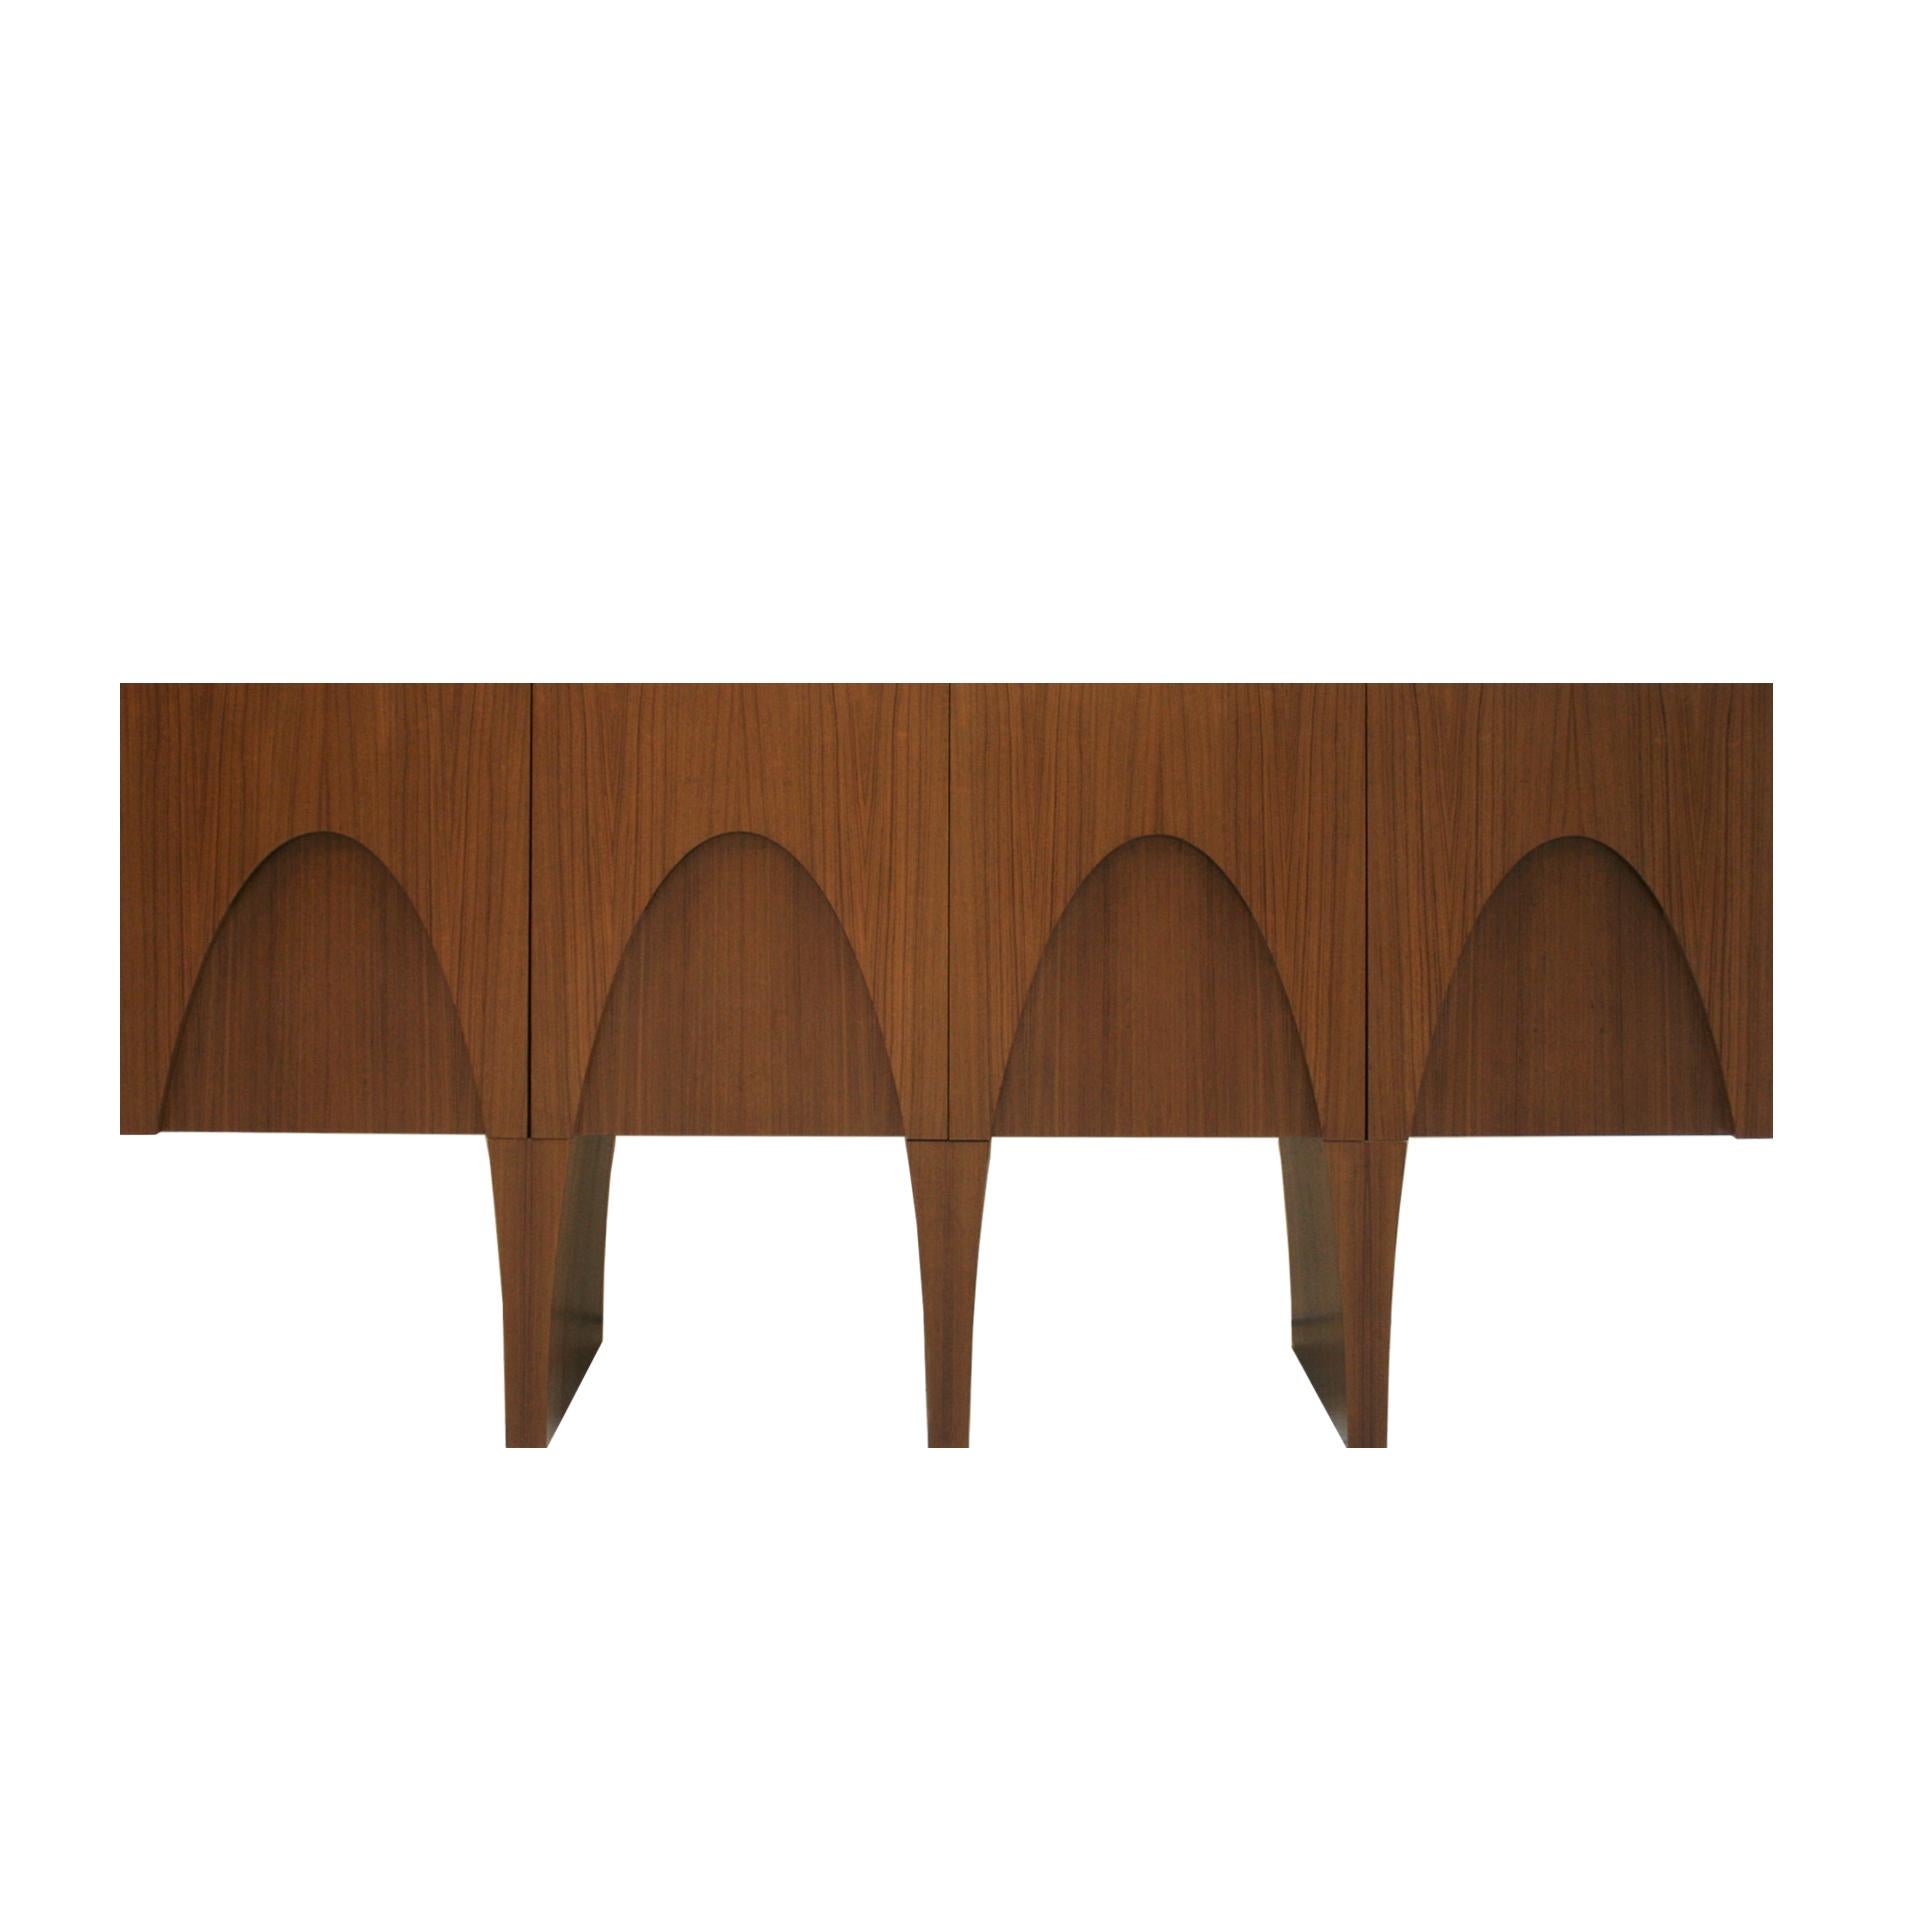 L.A. Studio Contemporary Modern Teak and Lemongrass Wood Sideboard In Good Condition In Ibiza, Spain